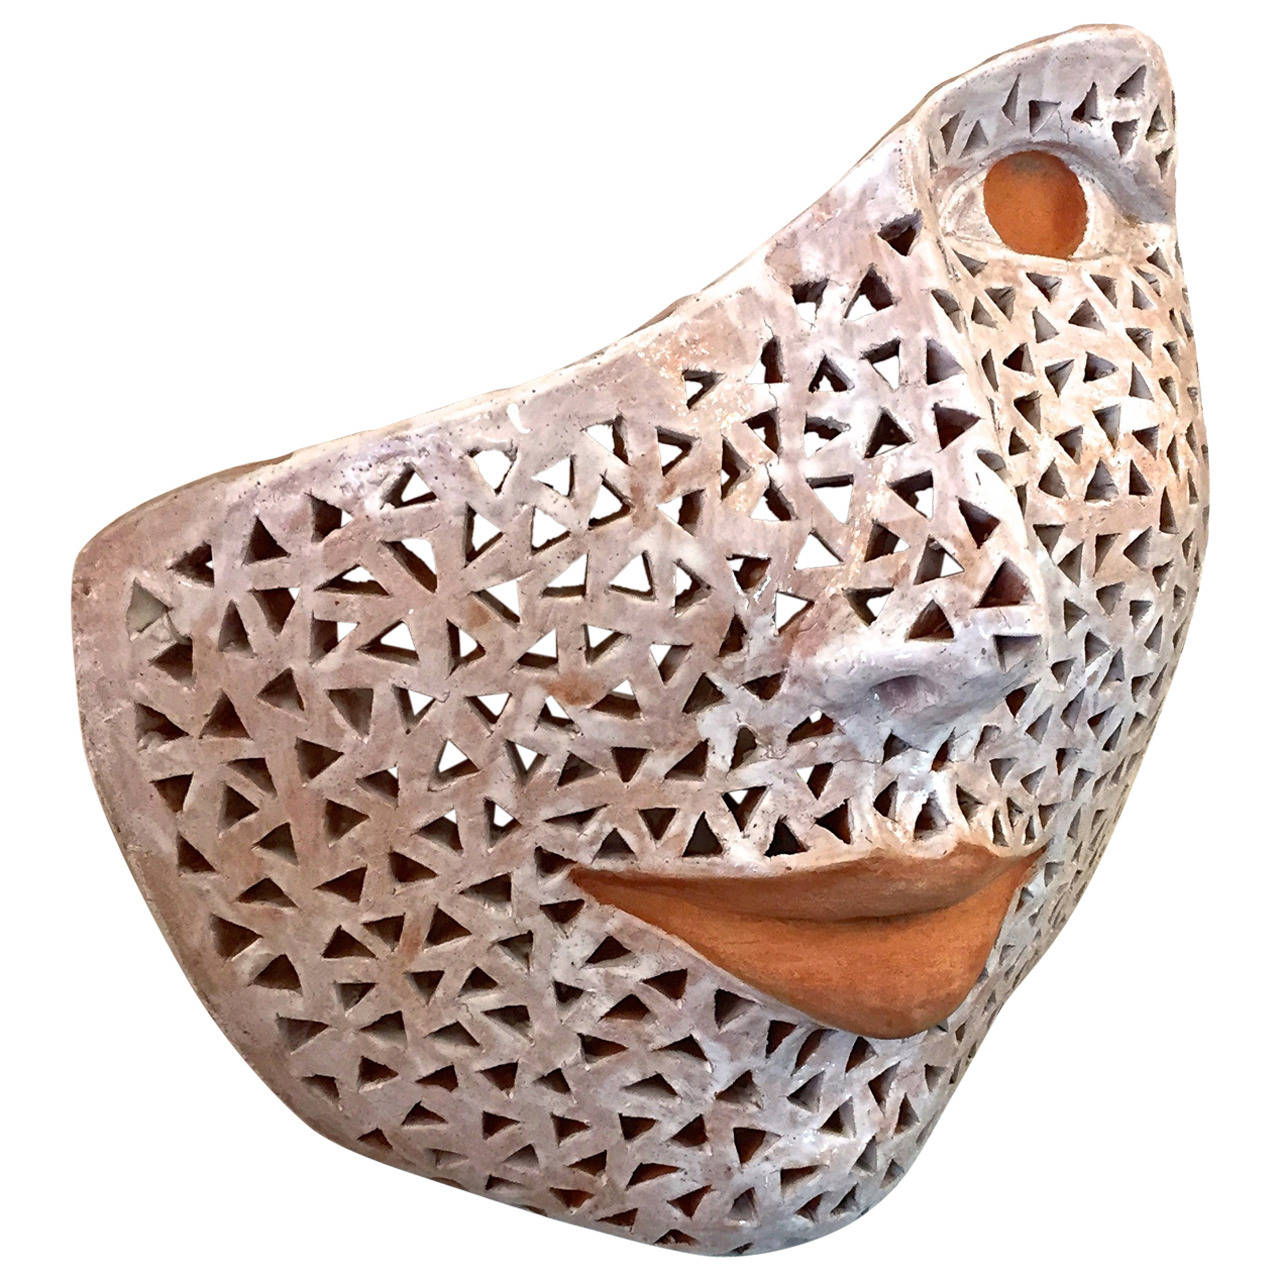 Italian Modern Perforated White Enameled Terracotta Wall Sculpture by Ginestroni